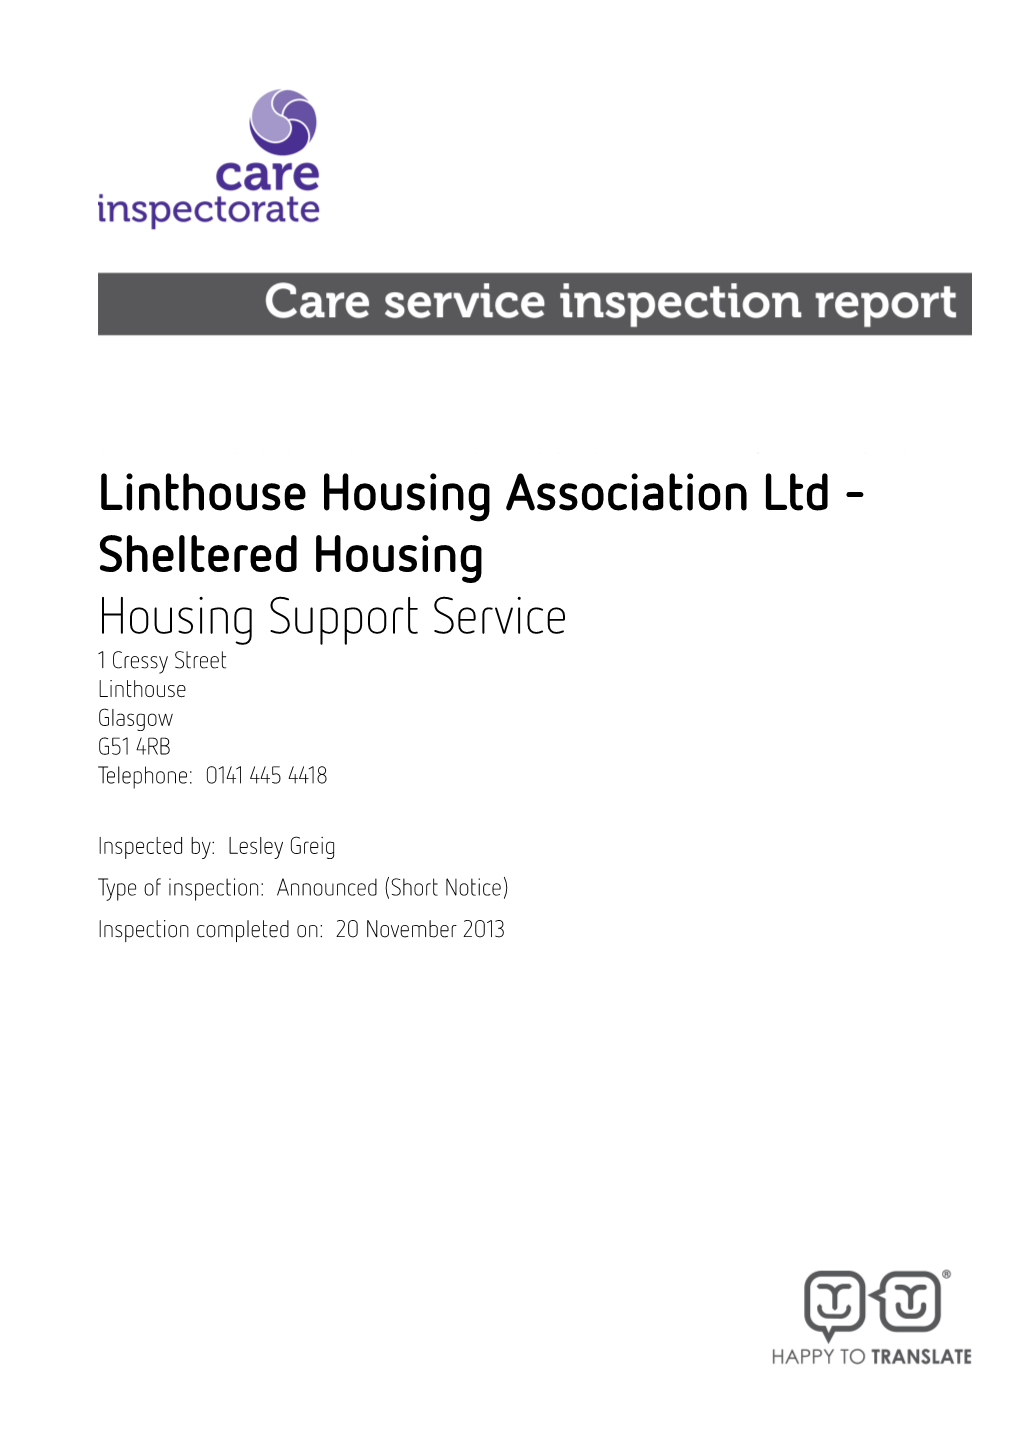 Linthouse Housing Association Ltd - Sheltered Housing Housing Support Service 1 Cressy Street Linthouse Glasgow G51 4RB Telephone: 0141 445 4418